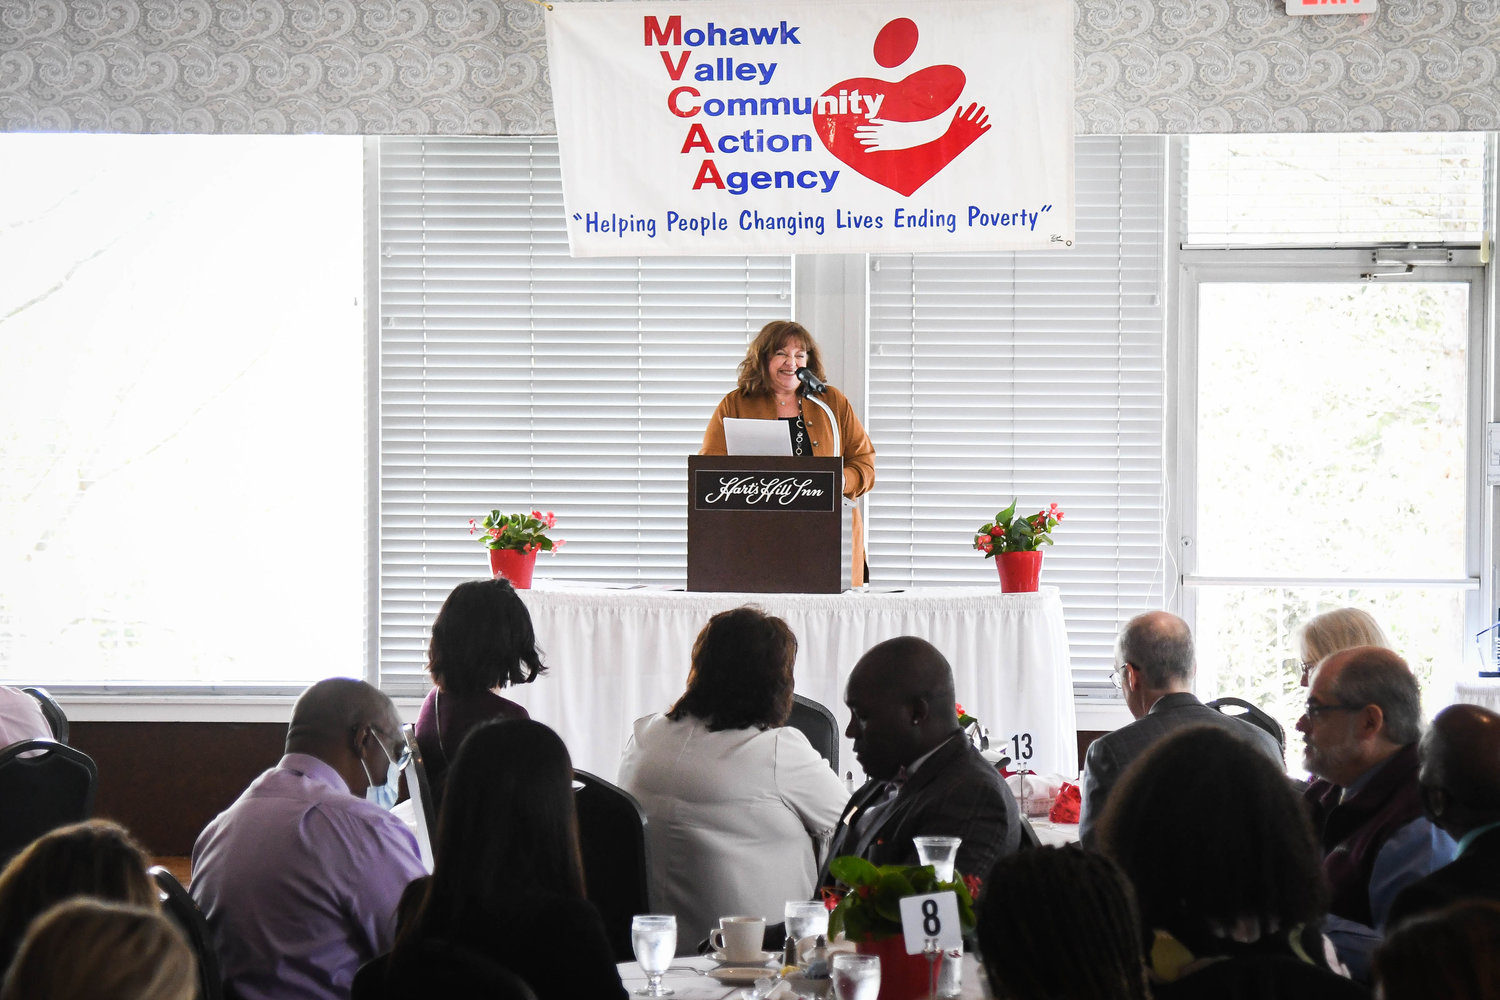 COMMUNITY CHAMPIONS — Karin Piseck speaks as Mohawk Valley Community Action Agency, Inc. honored the 2022 Community Champions at its annual luncheon on Thursday at Hart’s Hill Inn, in Whitesboro. The featured award recipients included: Susan Woods, the Treva Wood Community Activist Award recipient; Carol & Larry Russell, winners of the Community Visionary Award; Stone Ridge Residences, winner of the Community Builder Award; and Utica DEI Community Partnership, winner of the Community Ambassador Award.